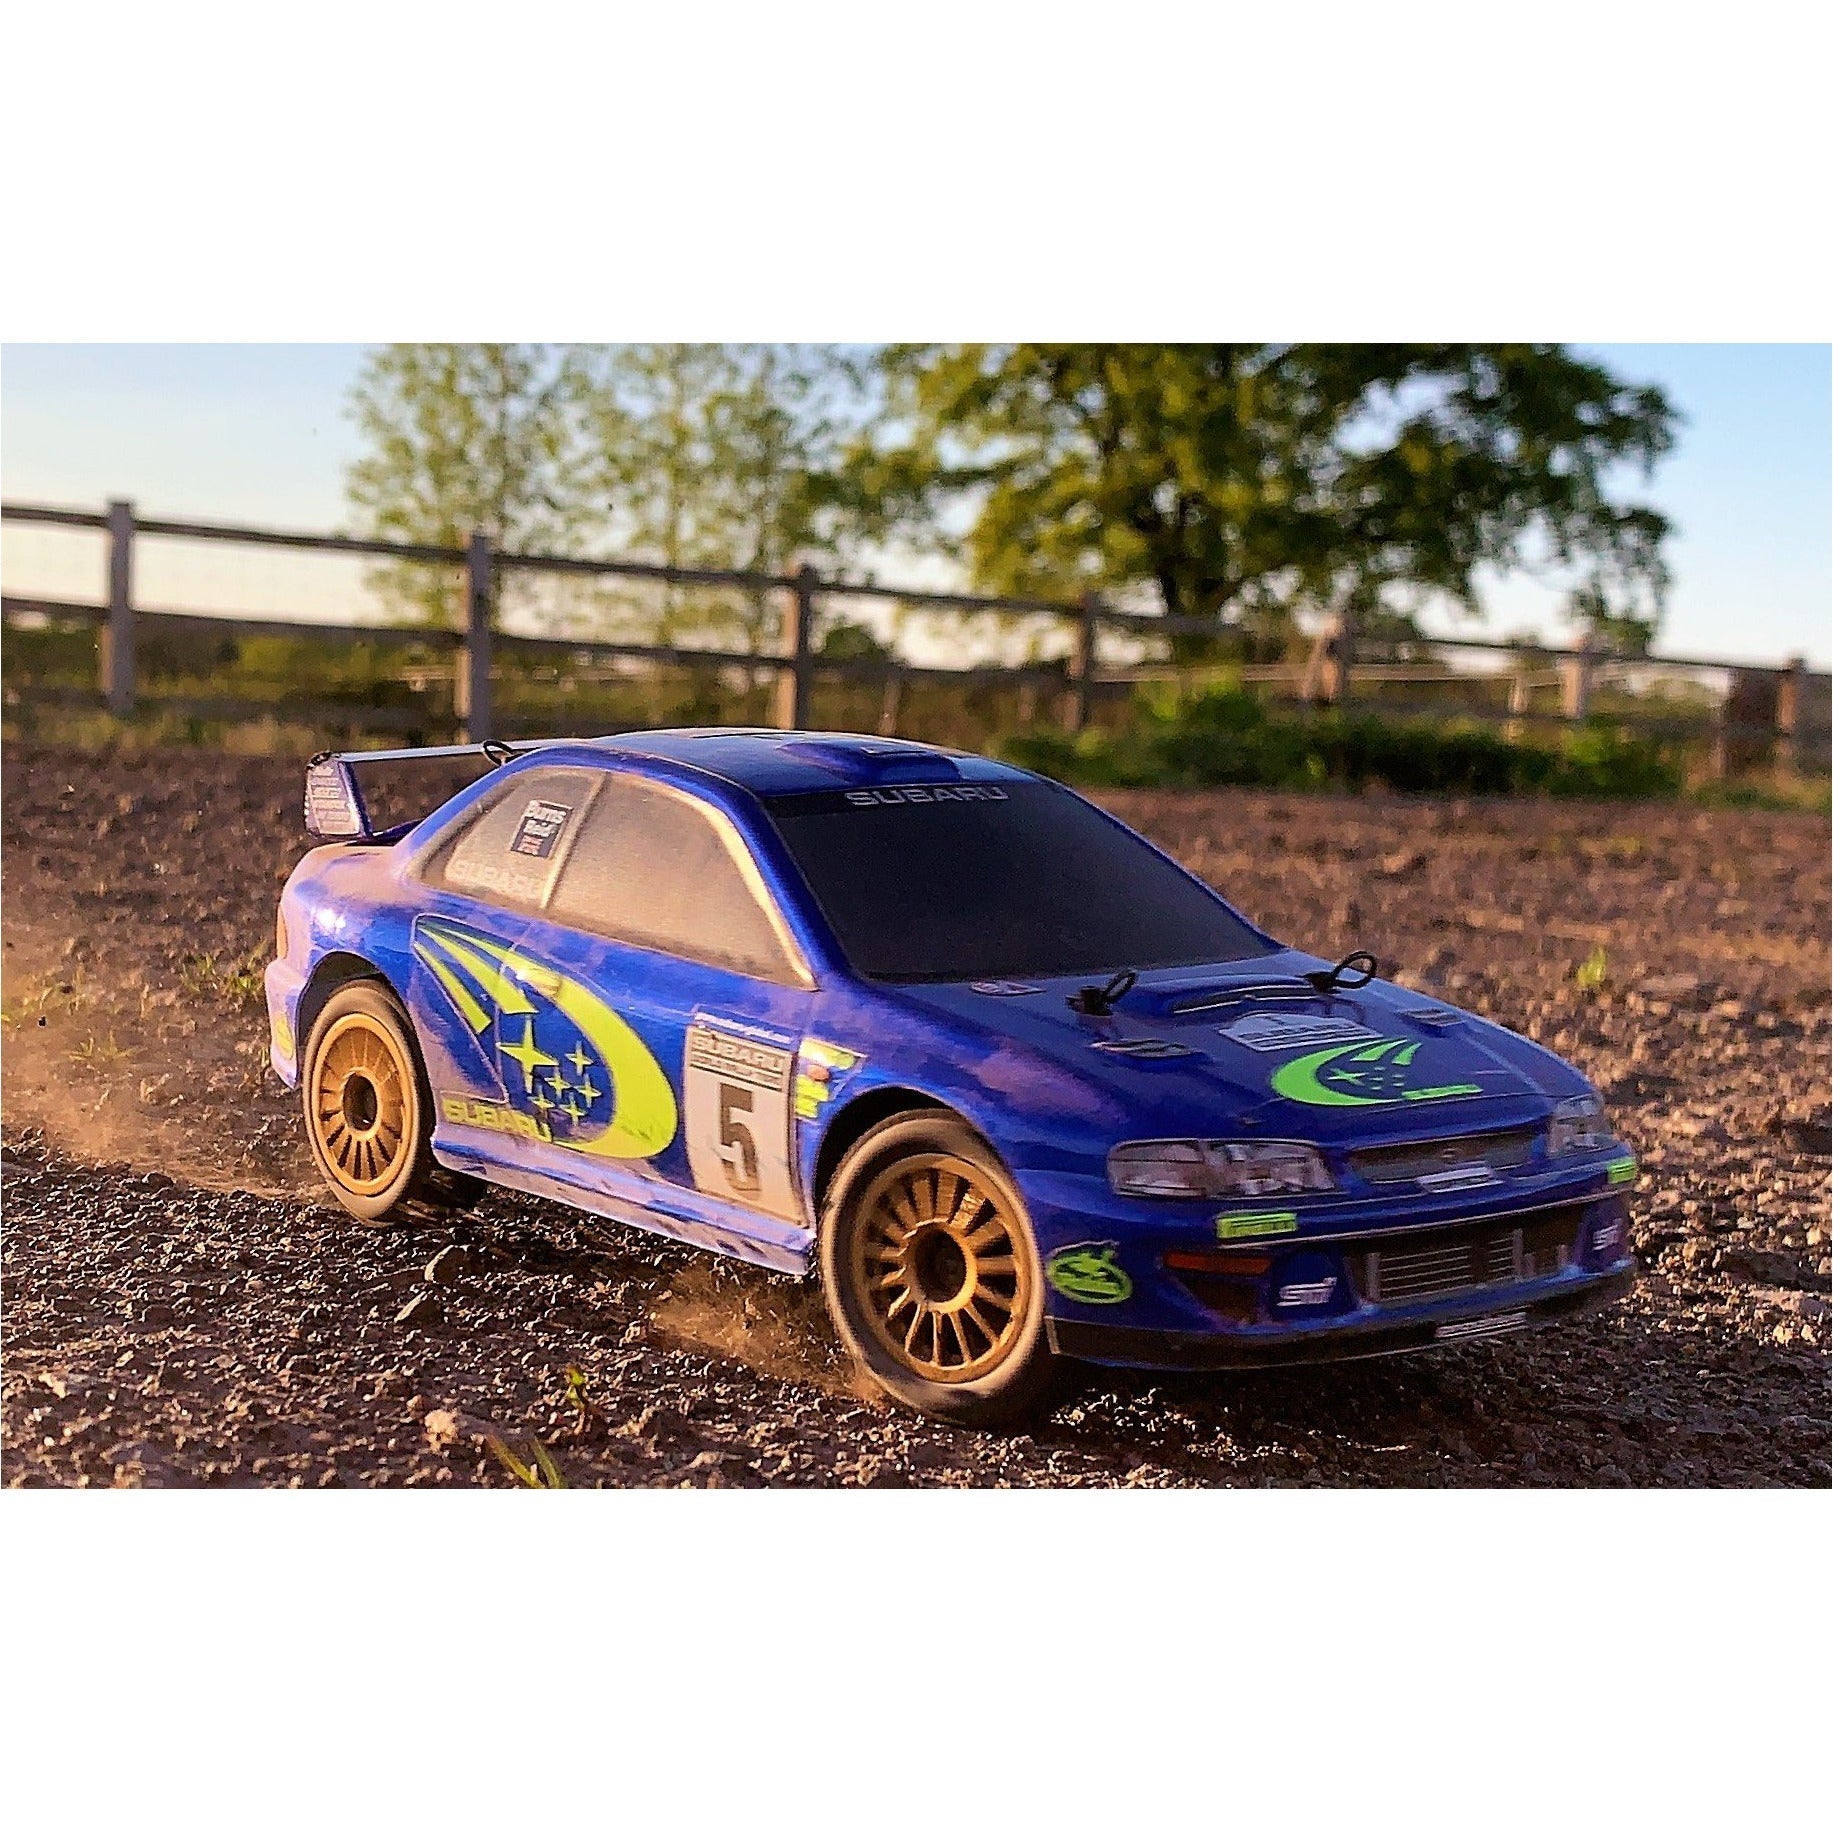 GT24 1/24 Scale Micro 4WD Brushless RTR, Subaru WRC - H y p e z RC